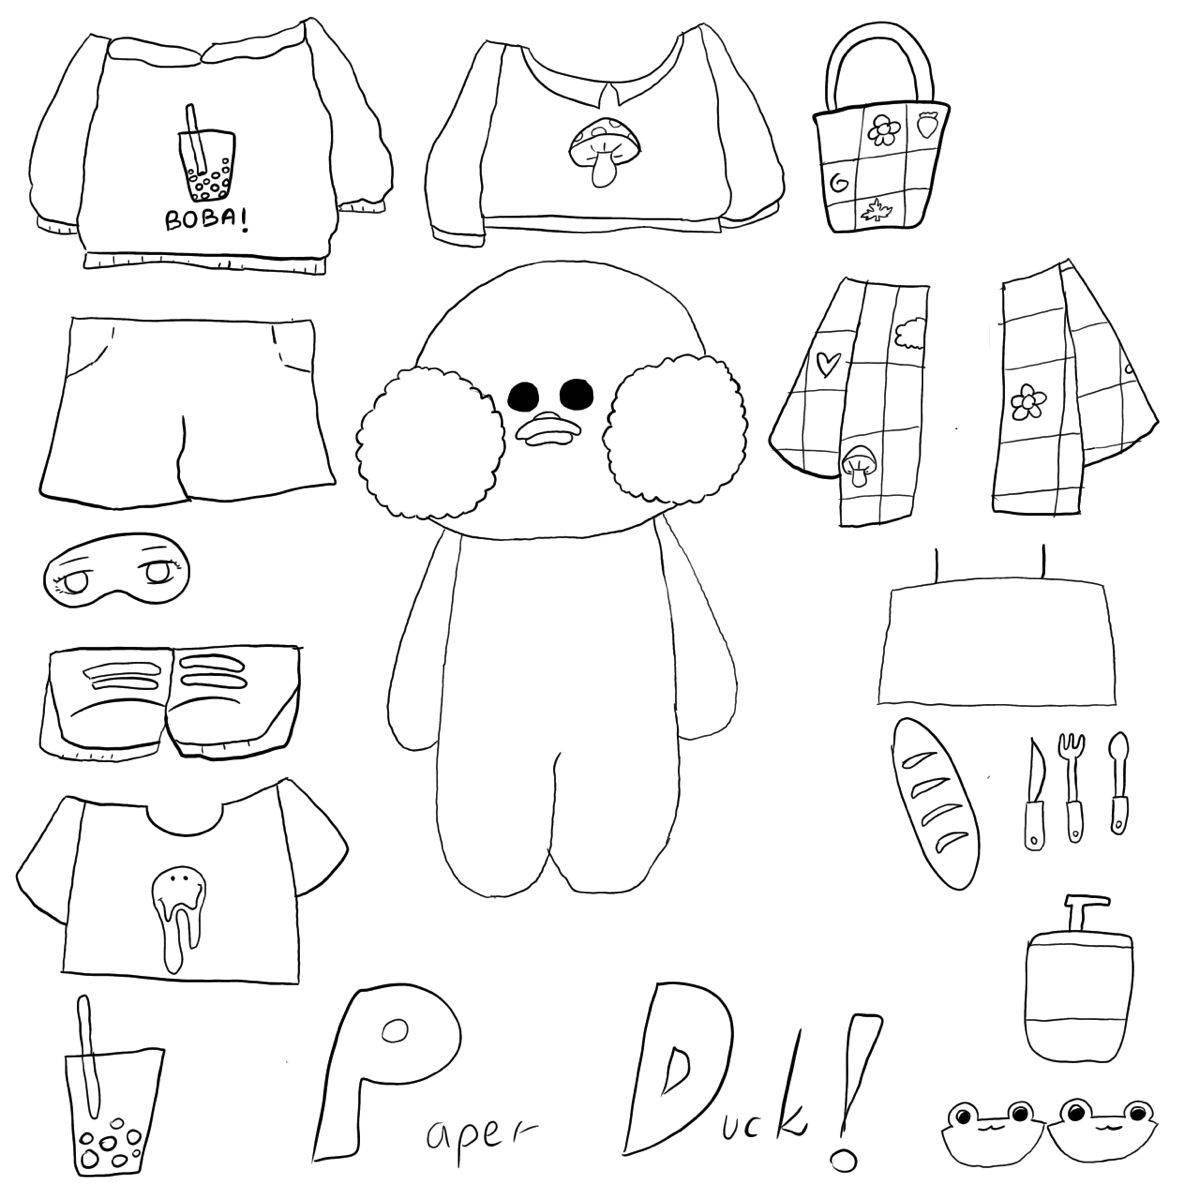 Lalaphan duck with clothes #3